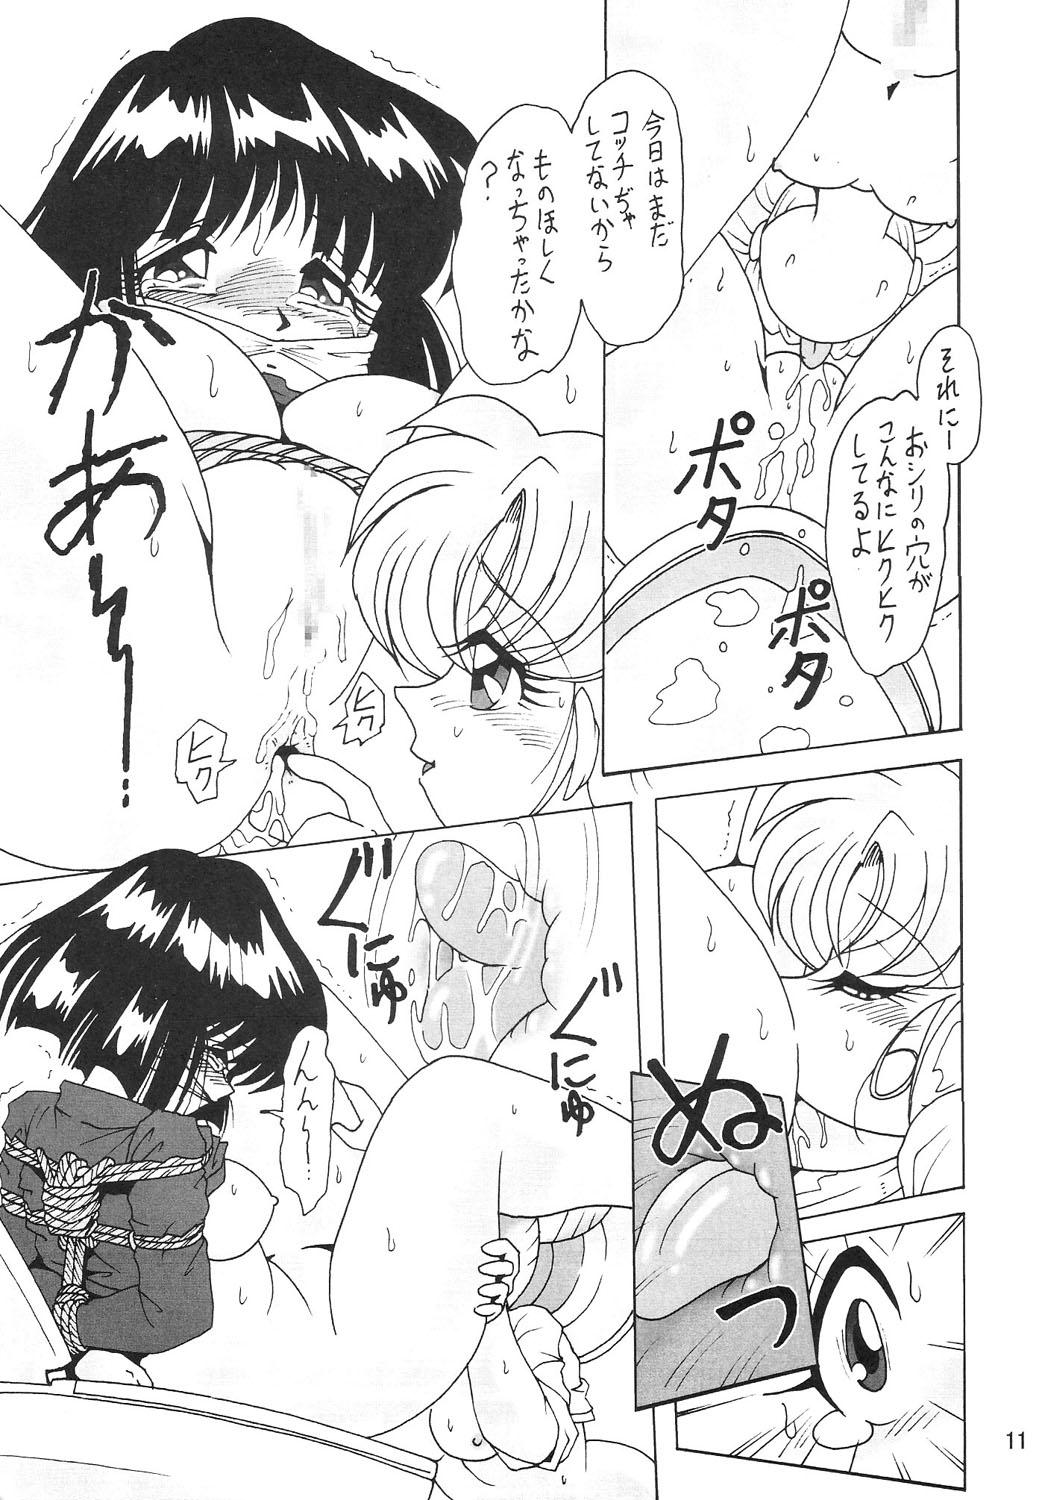 Spy Silent Saturn SS vol. 6 - Sailor moon For - Page 11